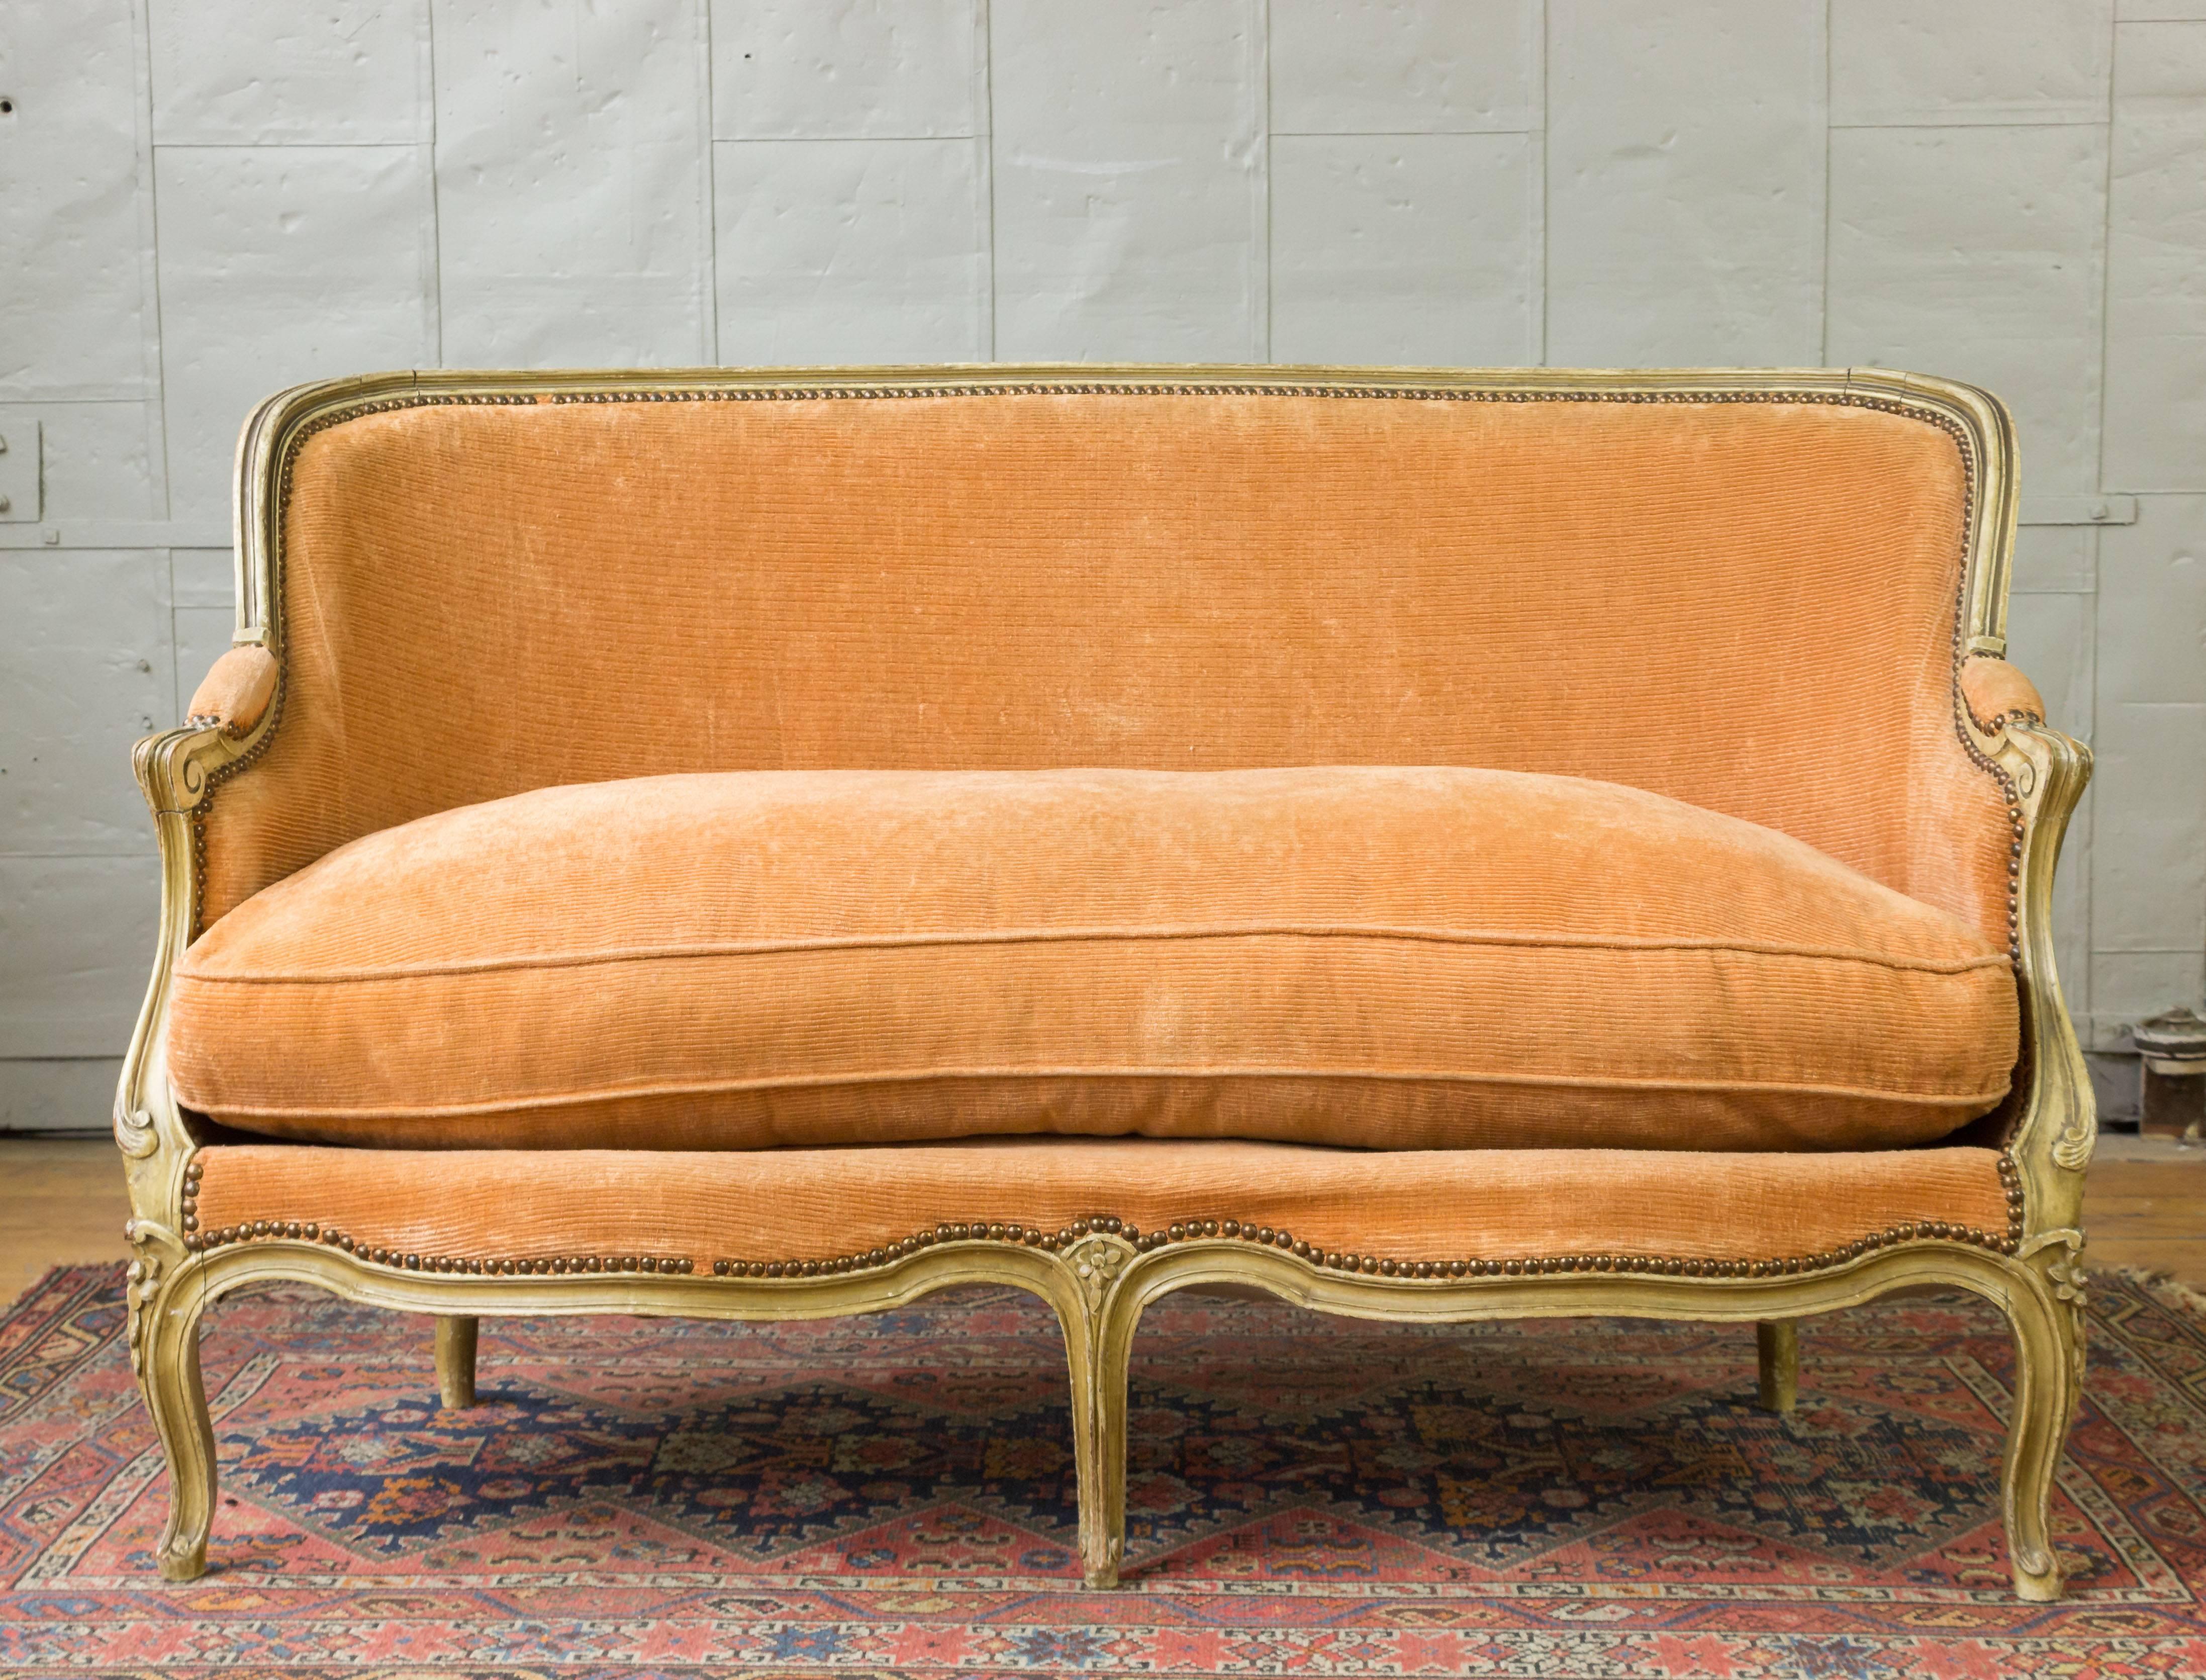 Well-proportioned small settee upholstered in velvet with loose seat cushion and high back. Original patinated wood finish, French, 1920s.

